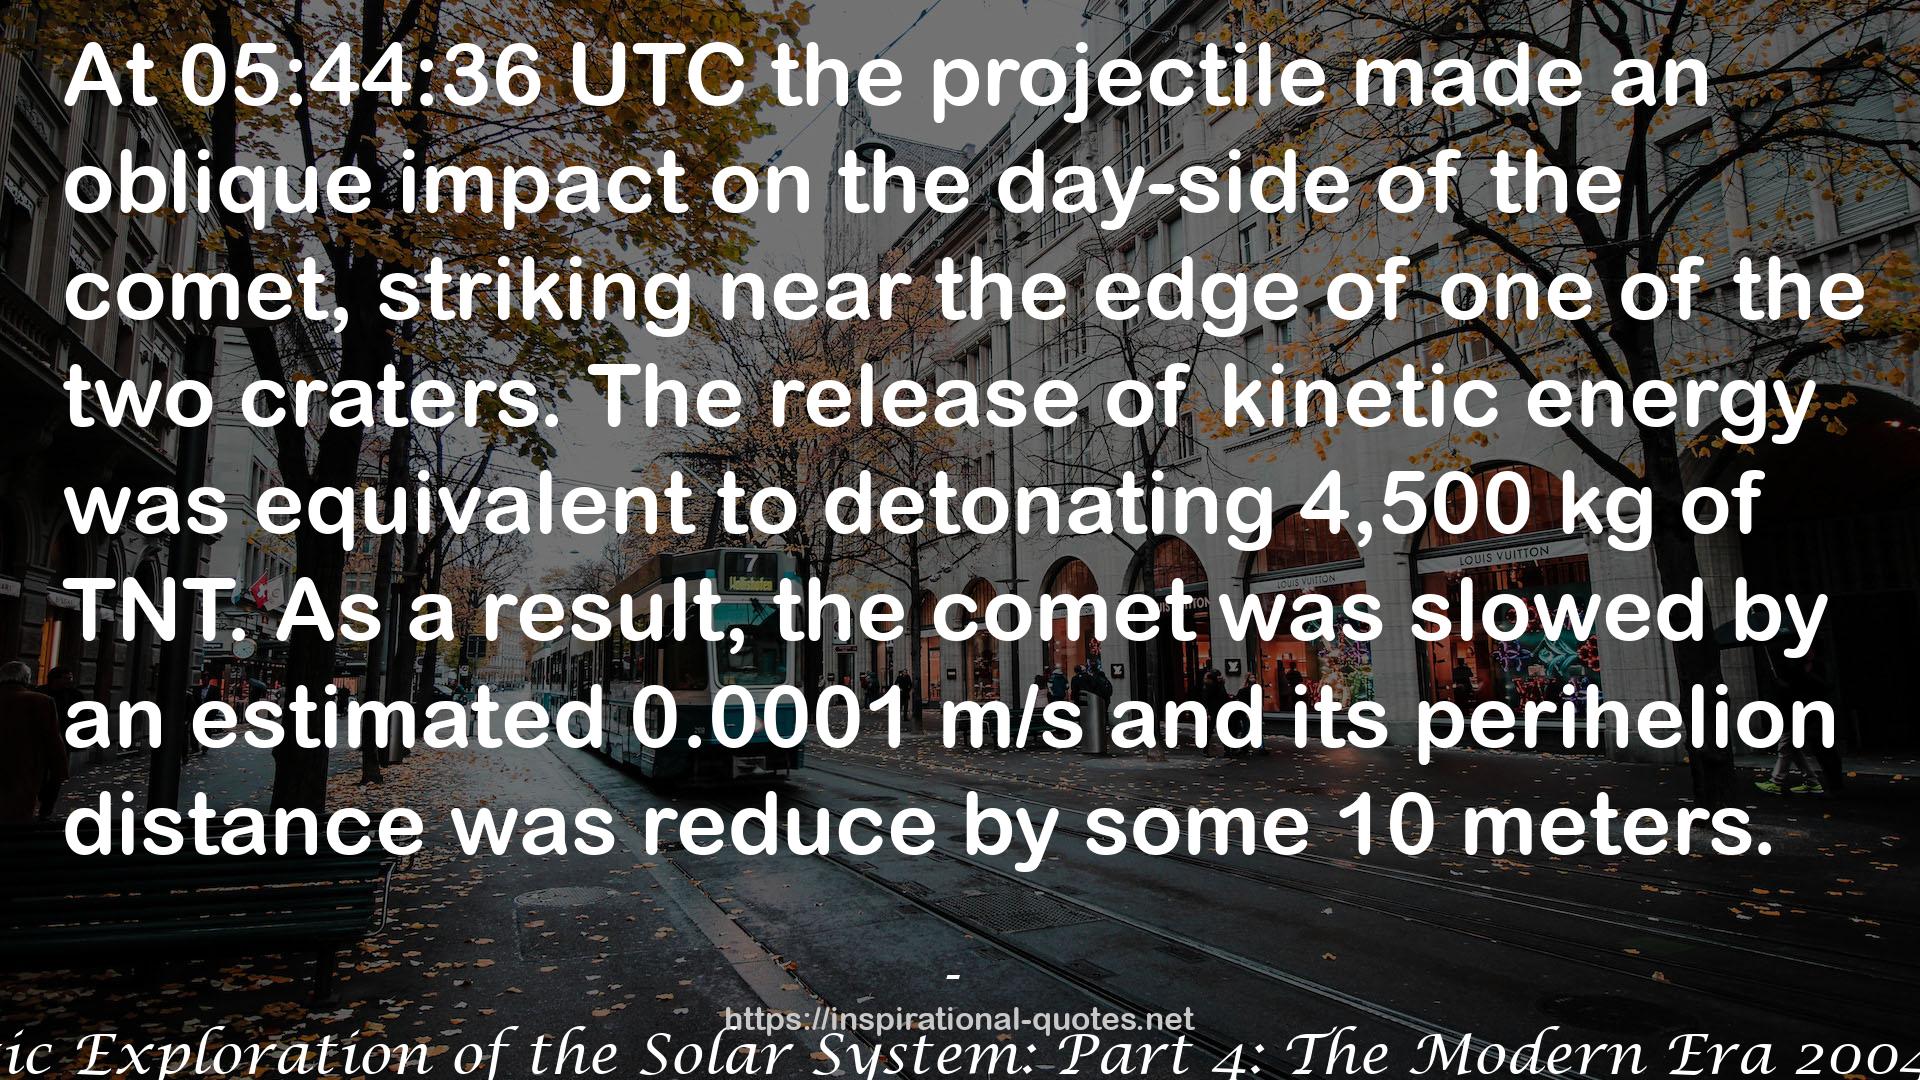 Robotic Exploration of the Solar System: Part 4: The Modern Era 2004 -2013 QUOTES